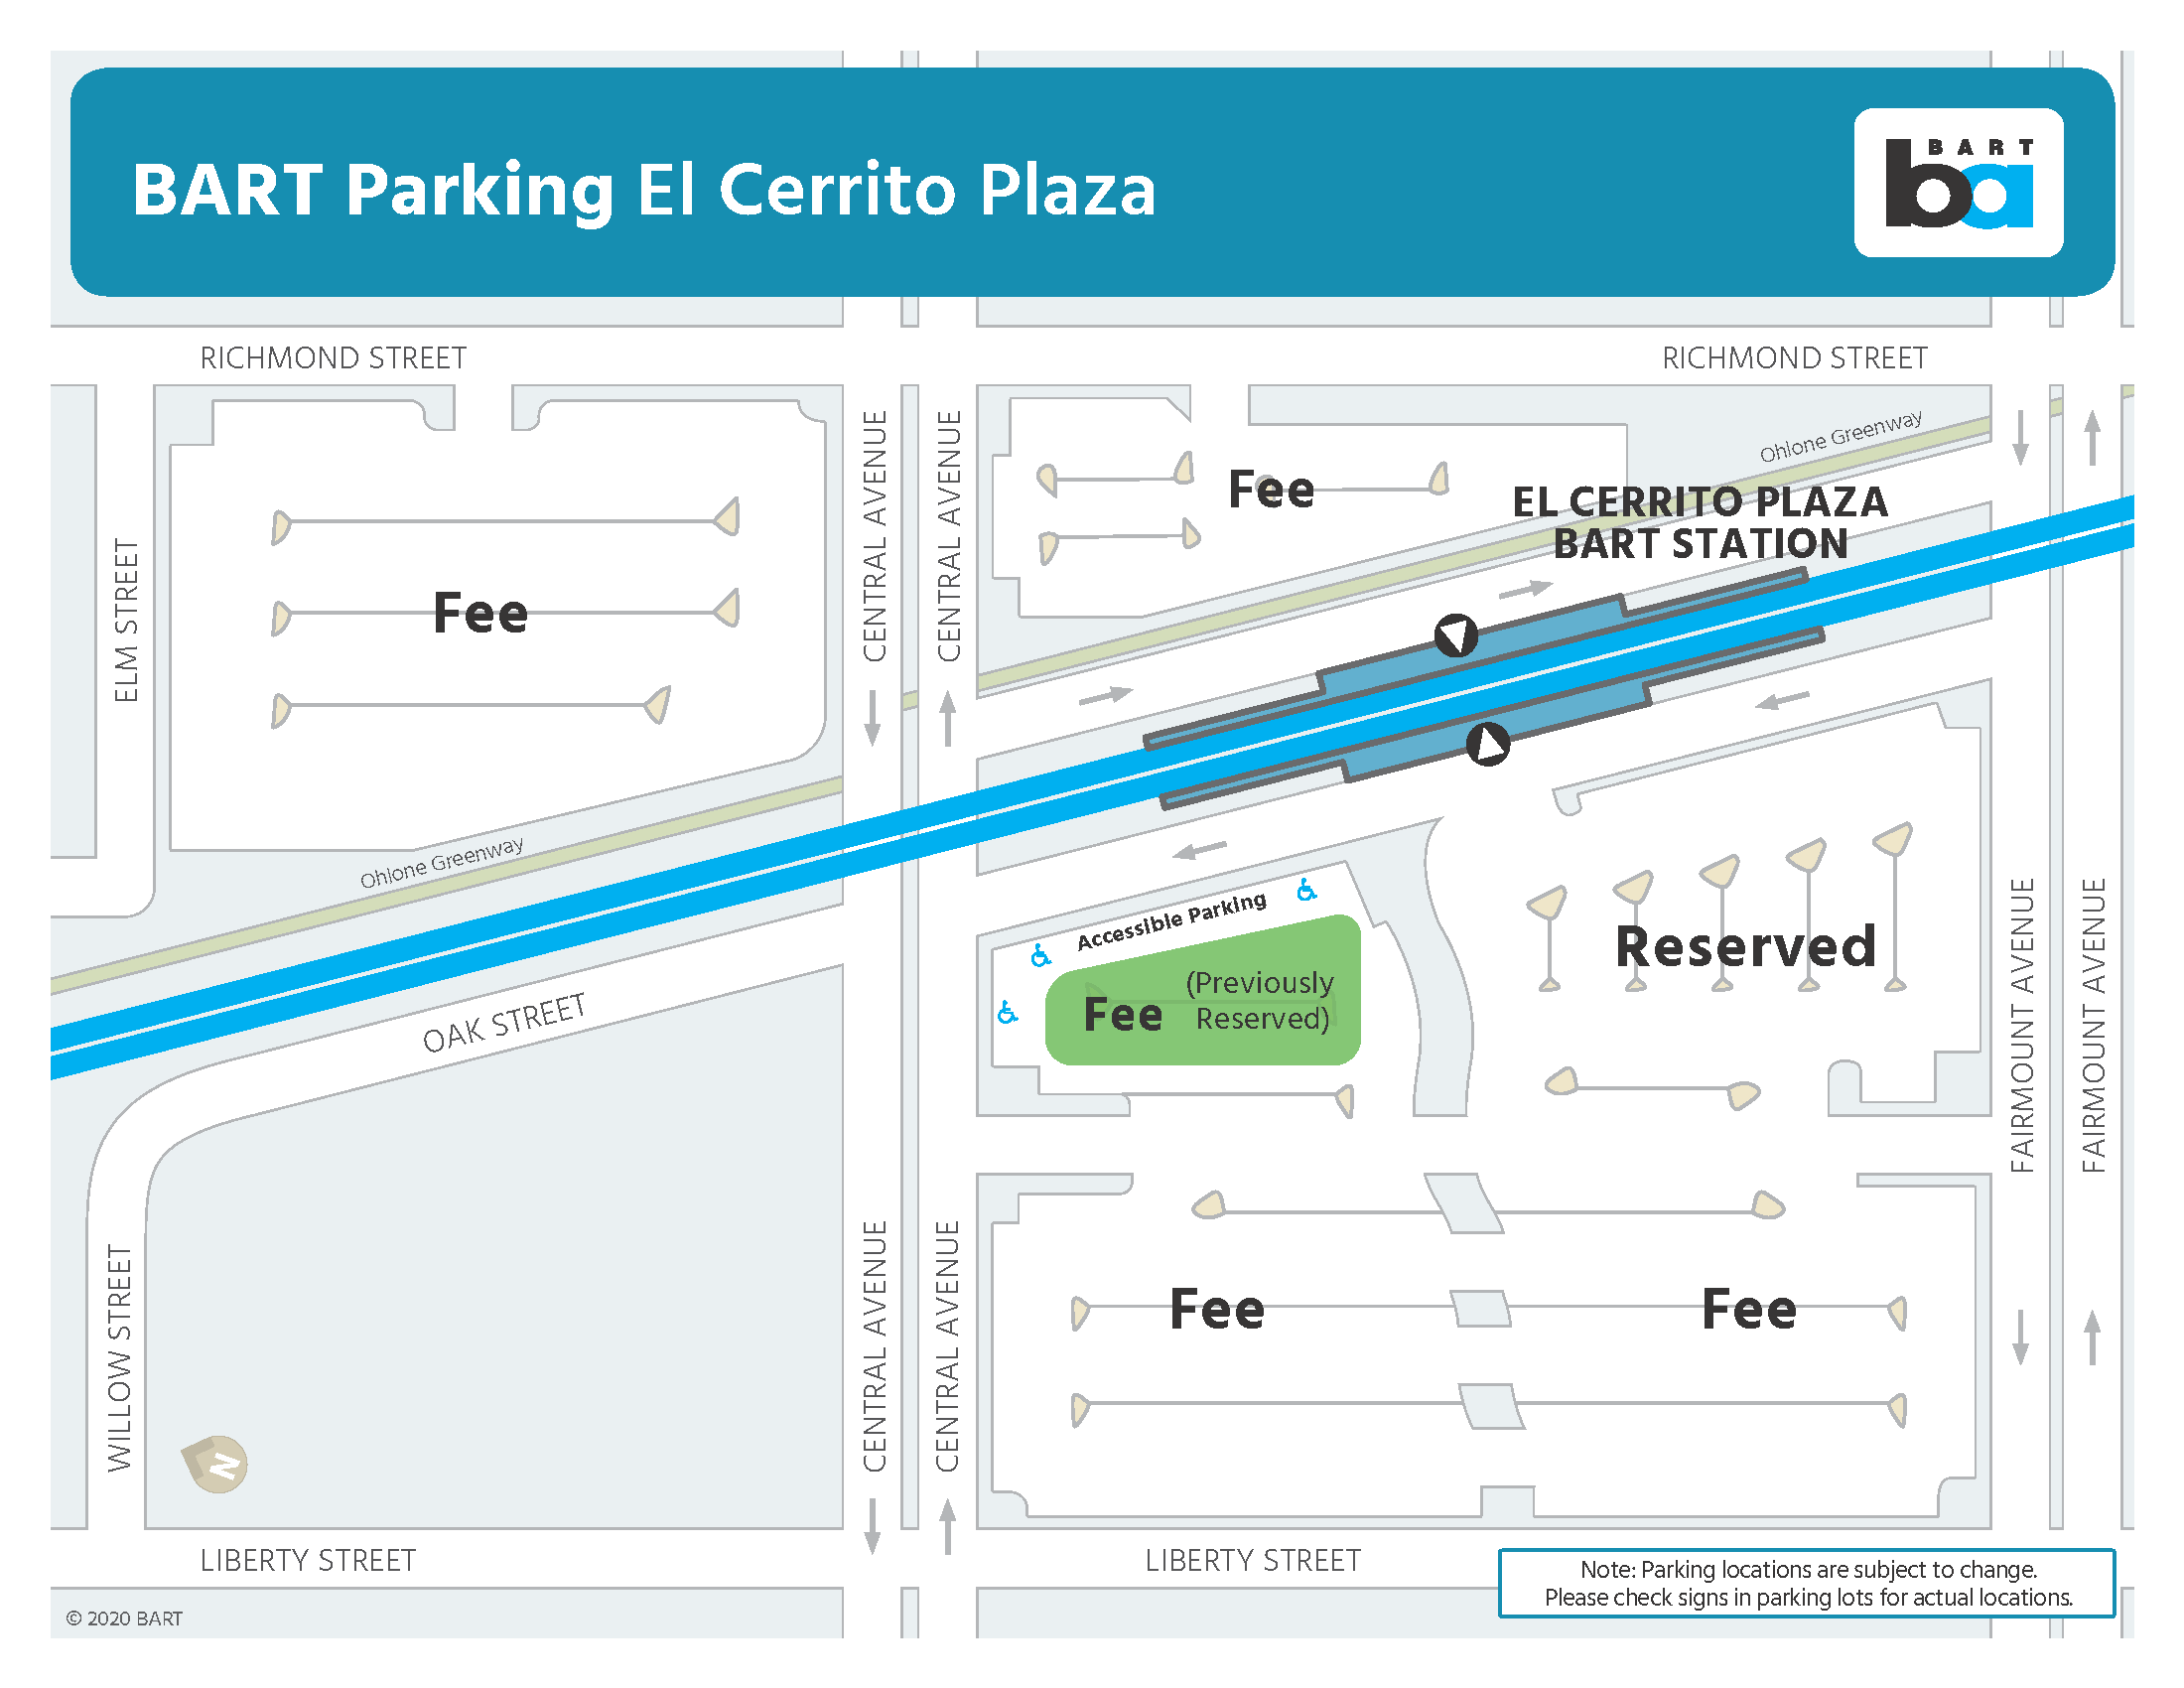 Parking areas at El Cerrito Plaza Station being reconfigured